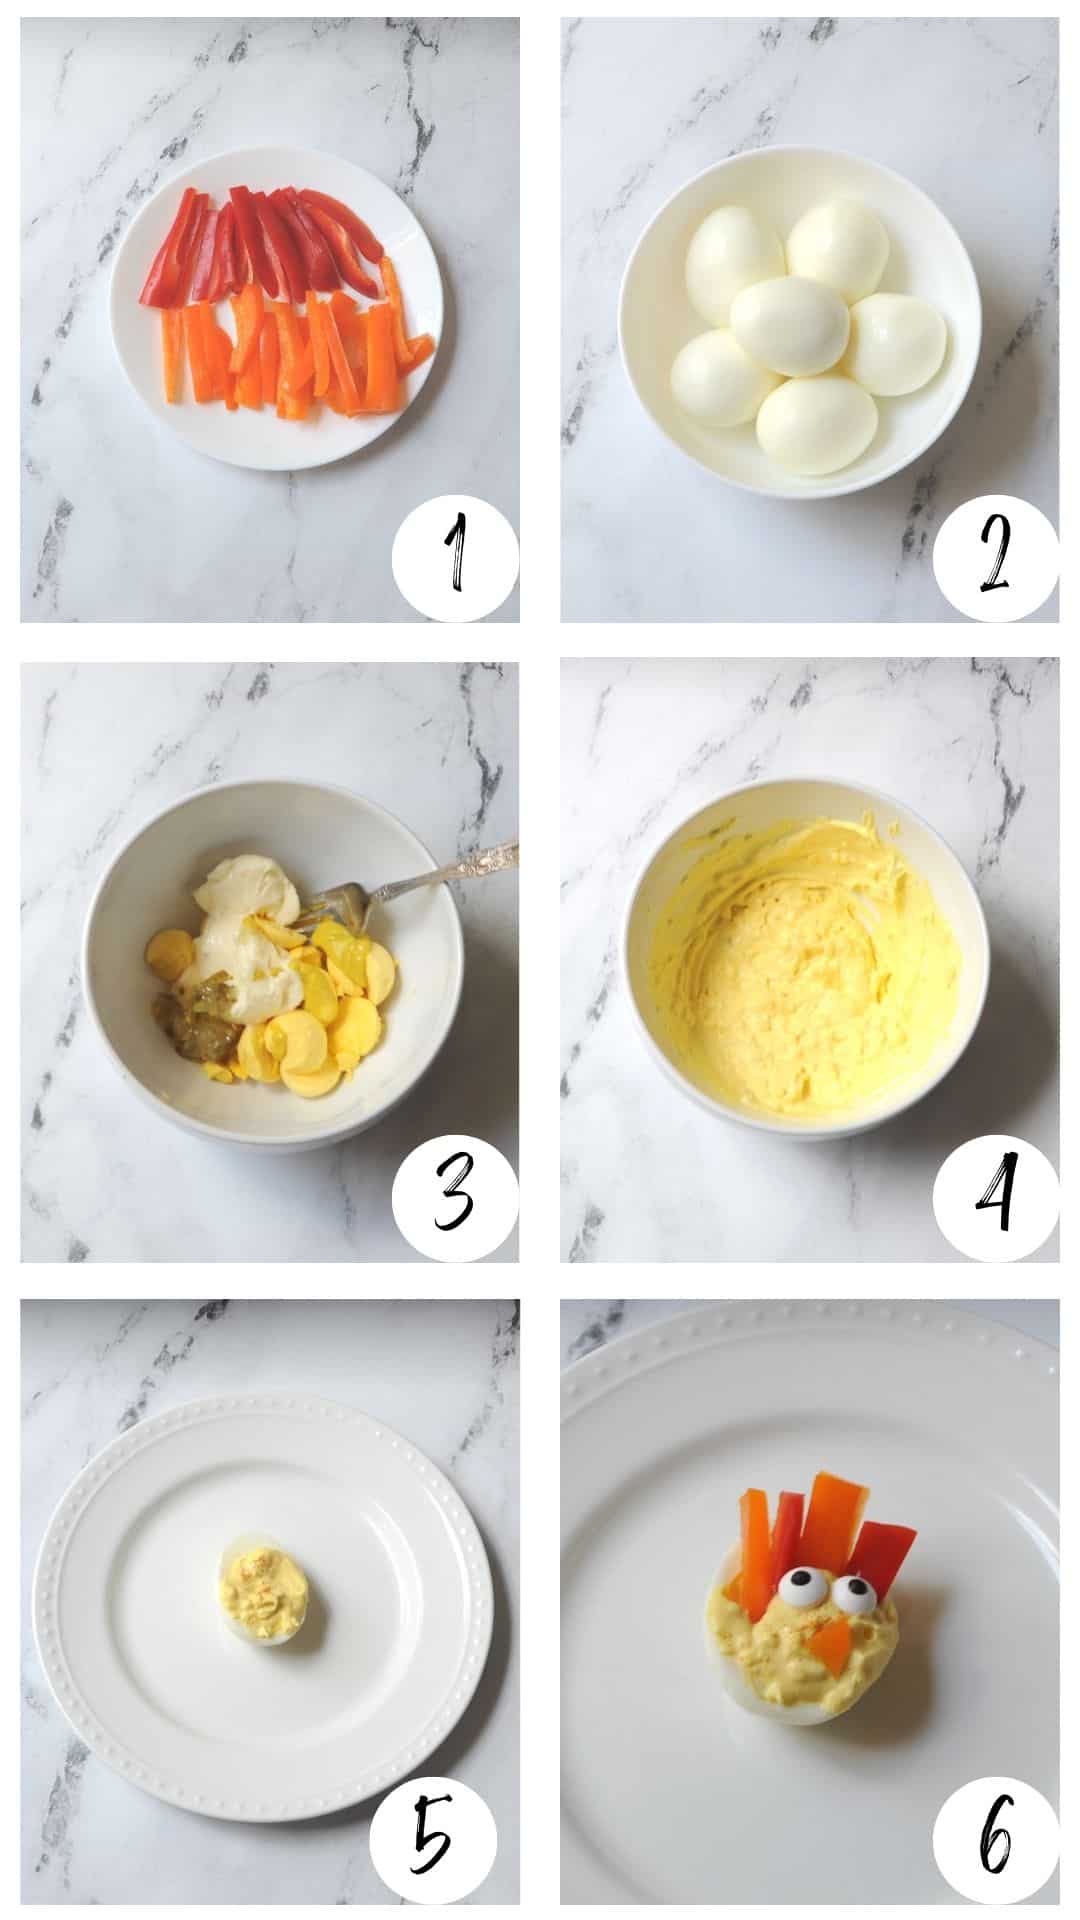 step by step guide on how to make Thanksgiving deviled eggs (it is a collage with 6 steps)